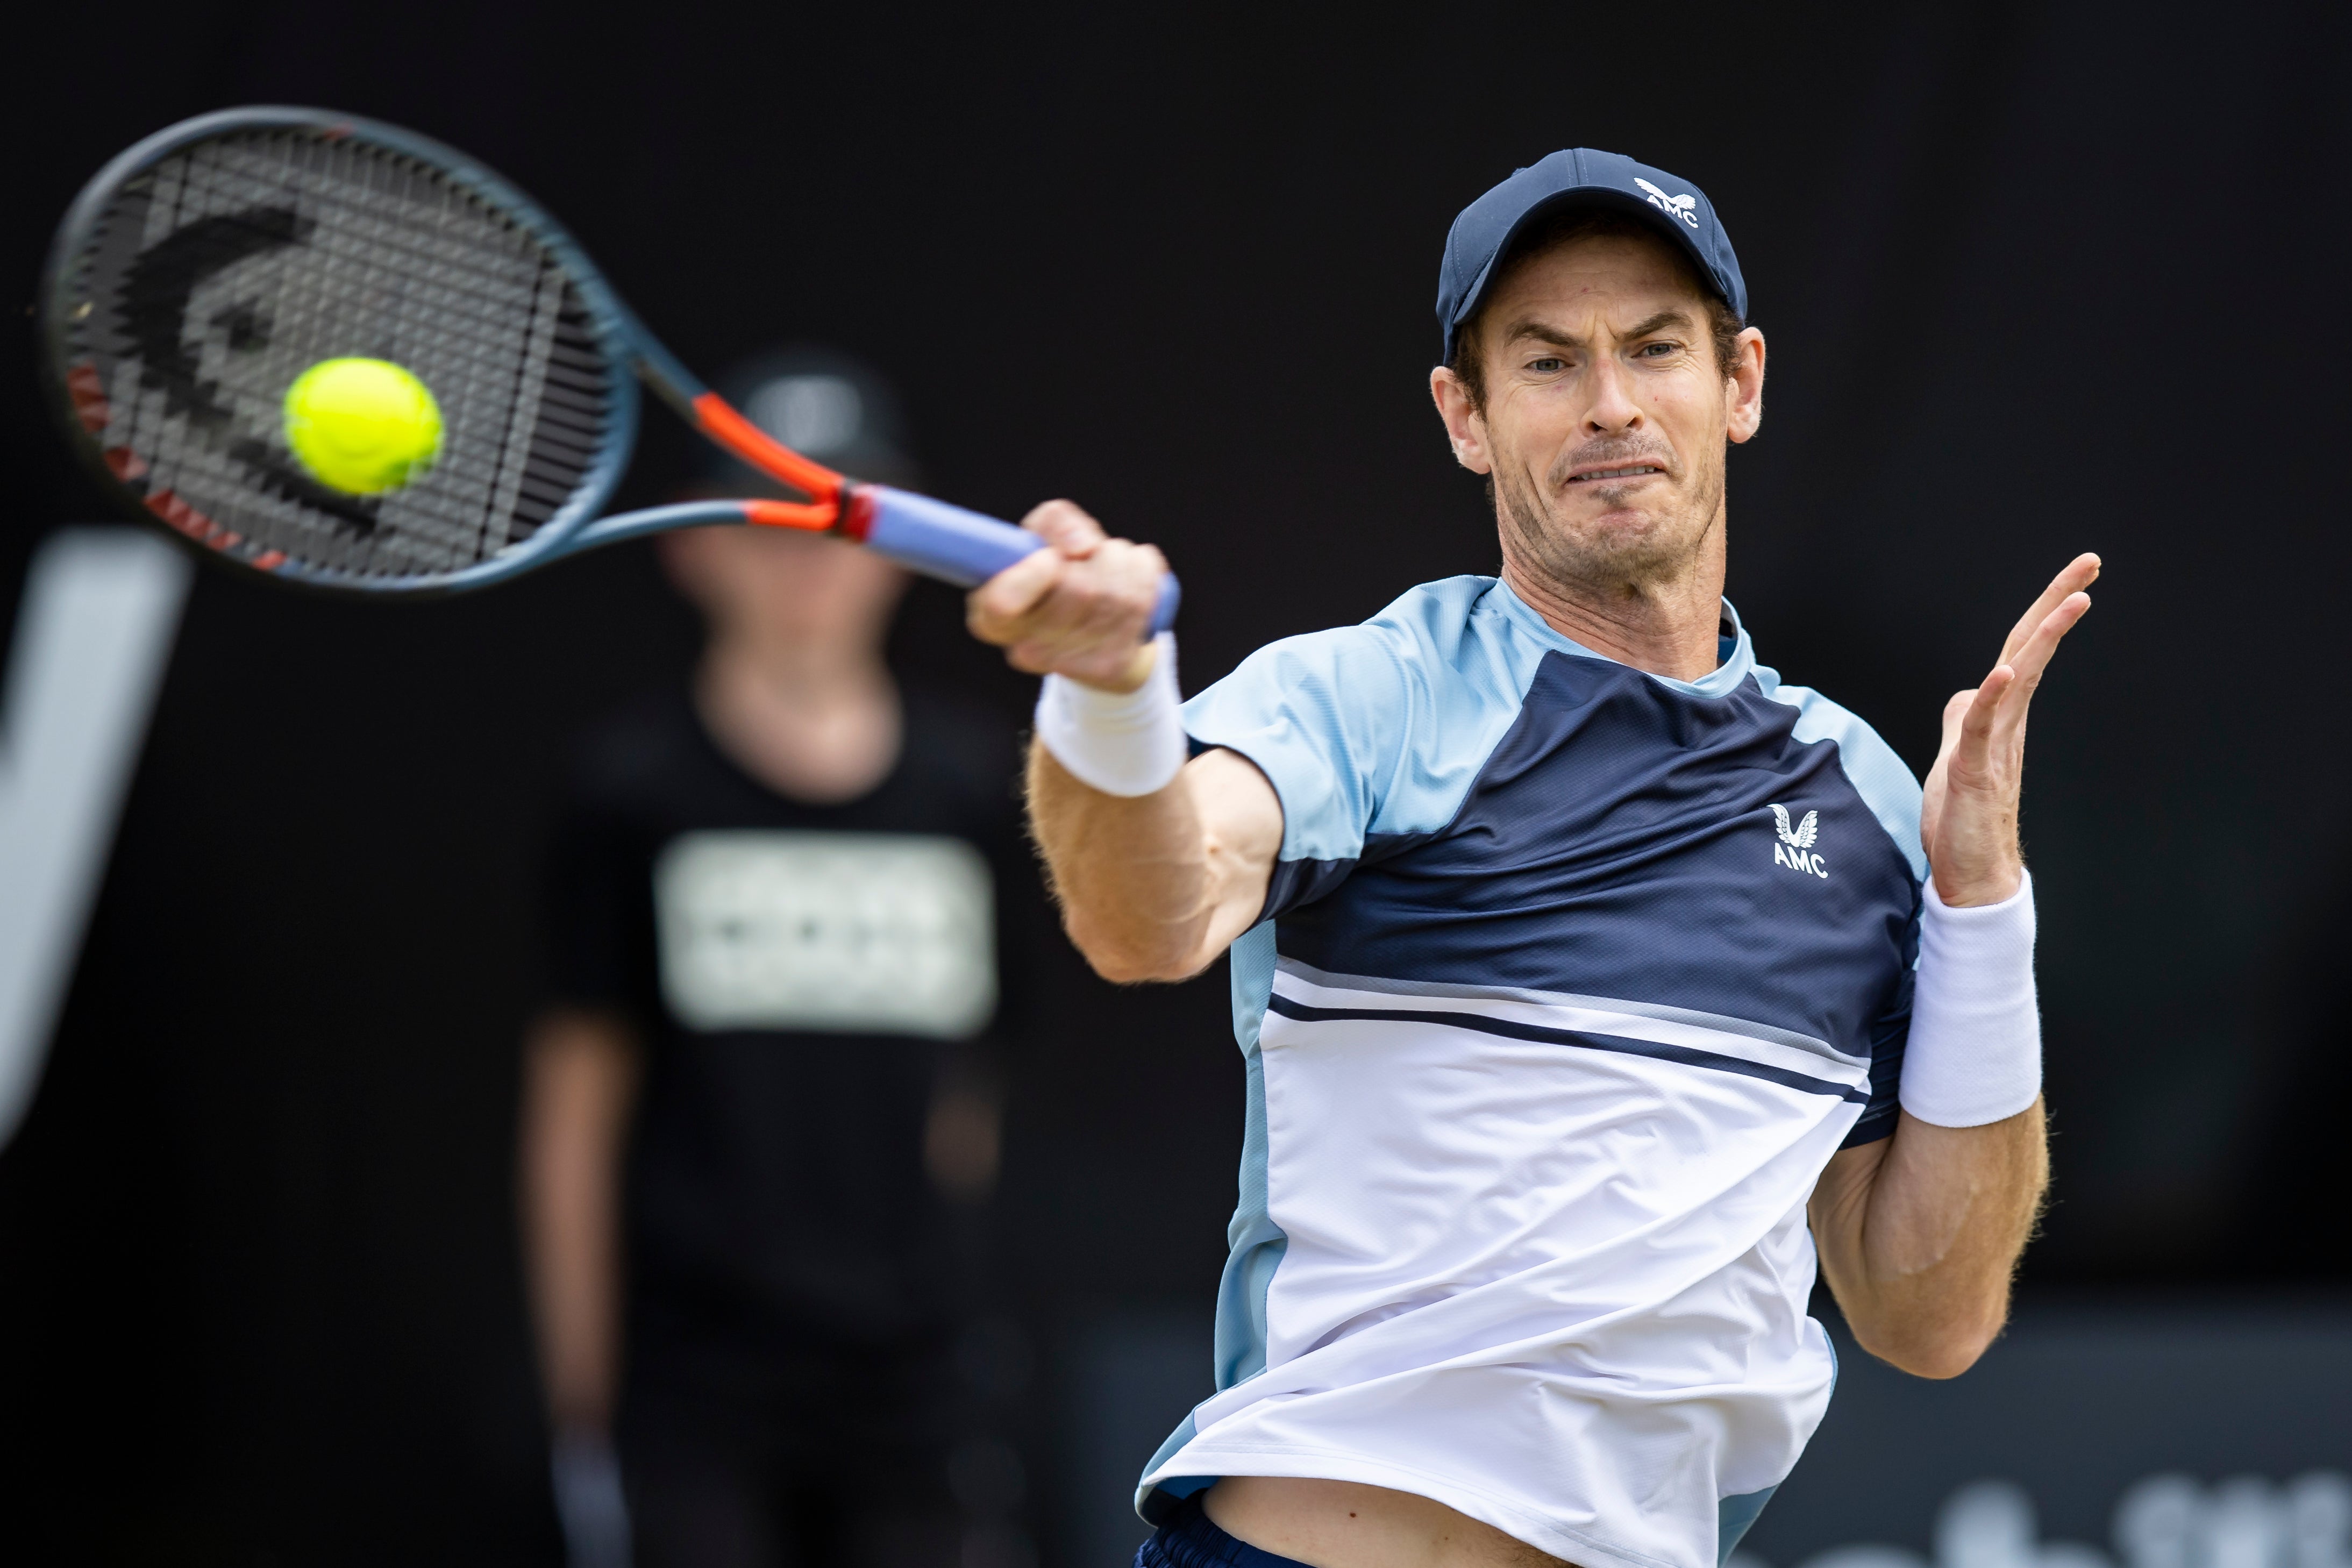 Andy Murray vs Nick Kyrgios live stream How to watch Stuttgart Open semi-final online The Independent